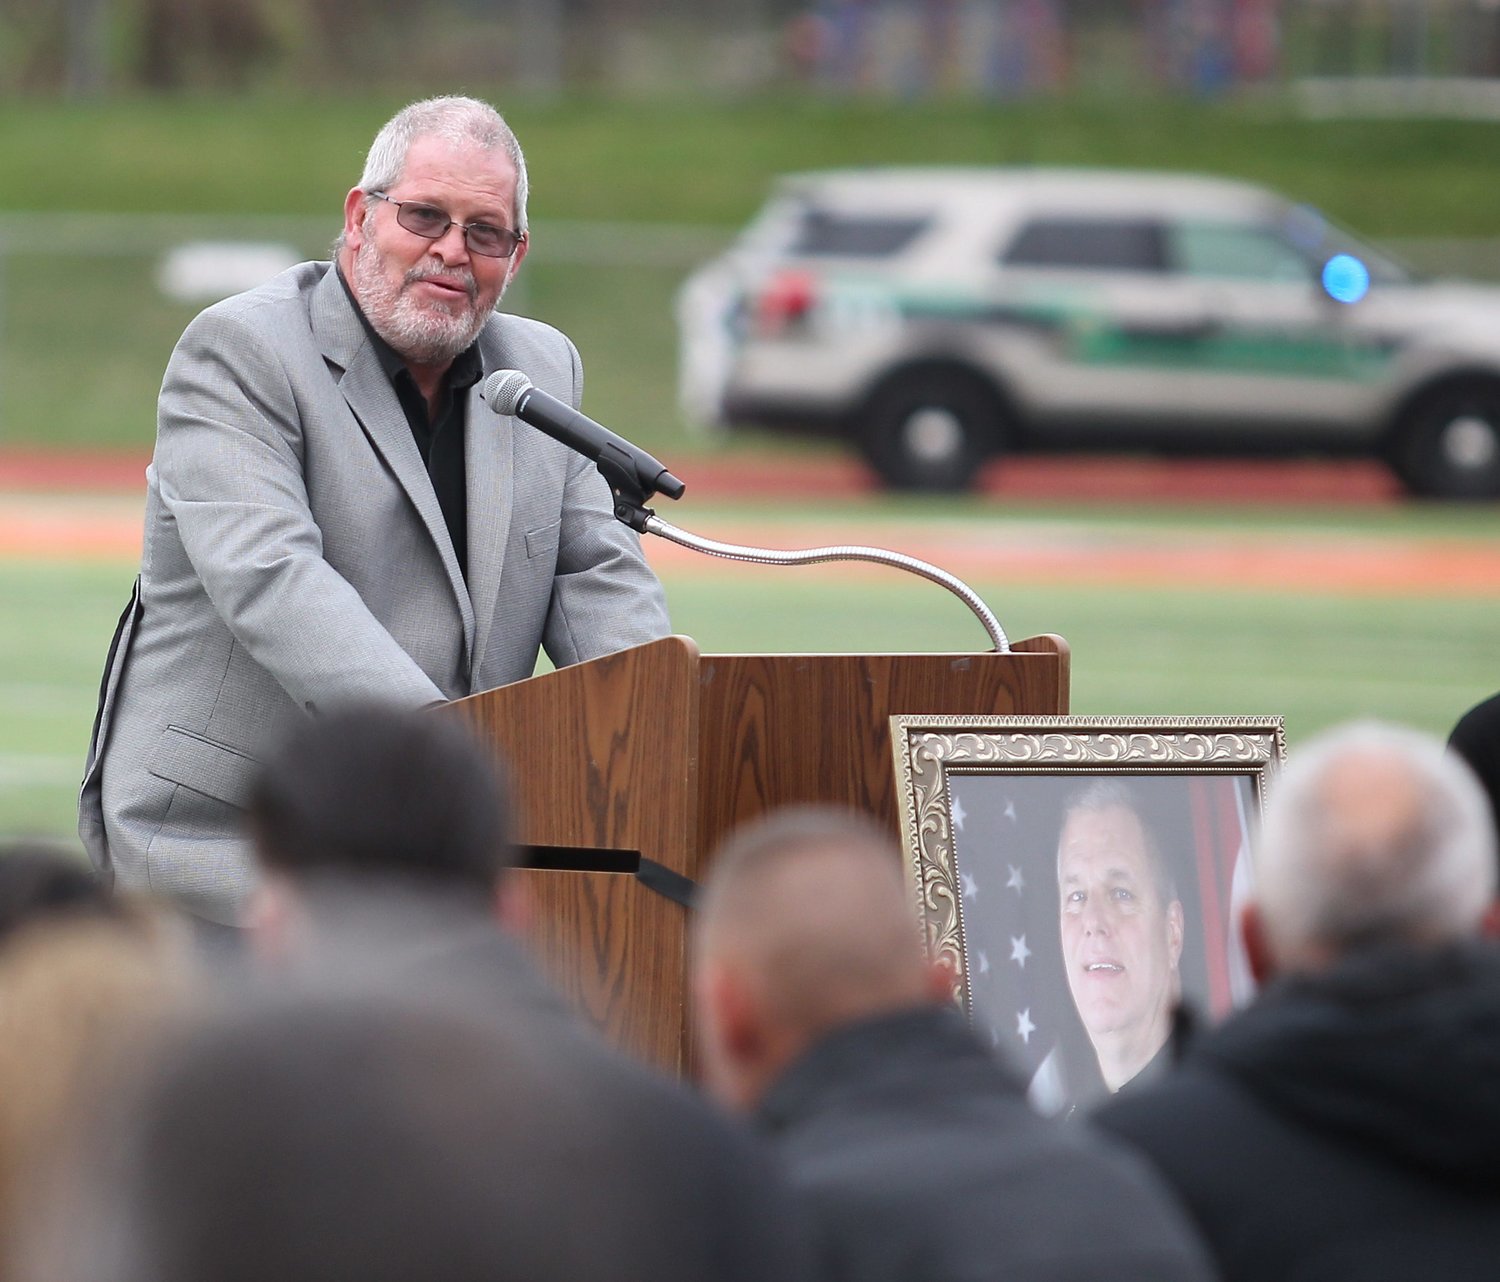 Doug McAntire, a lifelong friend of Steve Farnsworth, speaks as the officiant for Farnsworth's funeral Saturday at Spainhower Field.